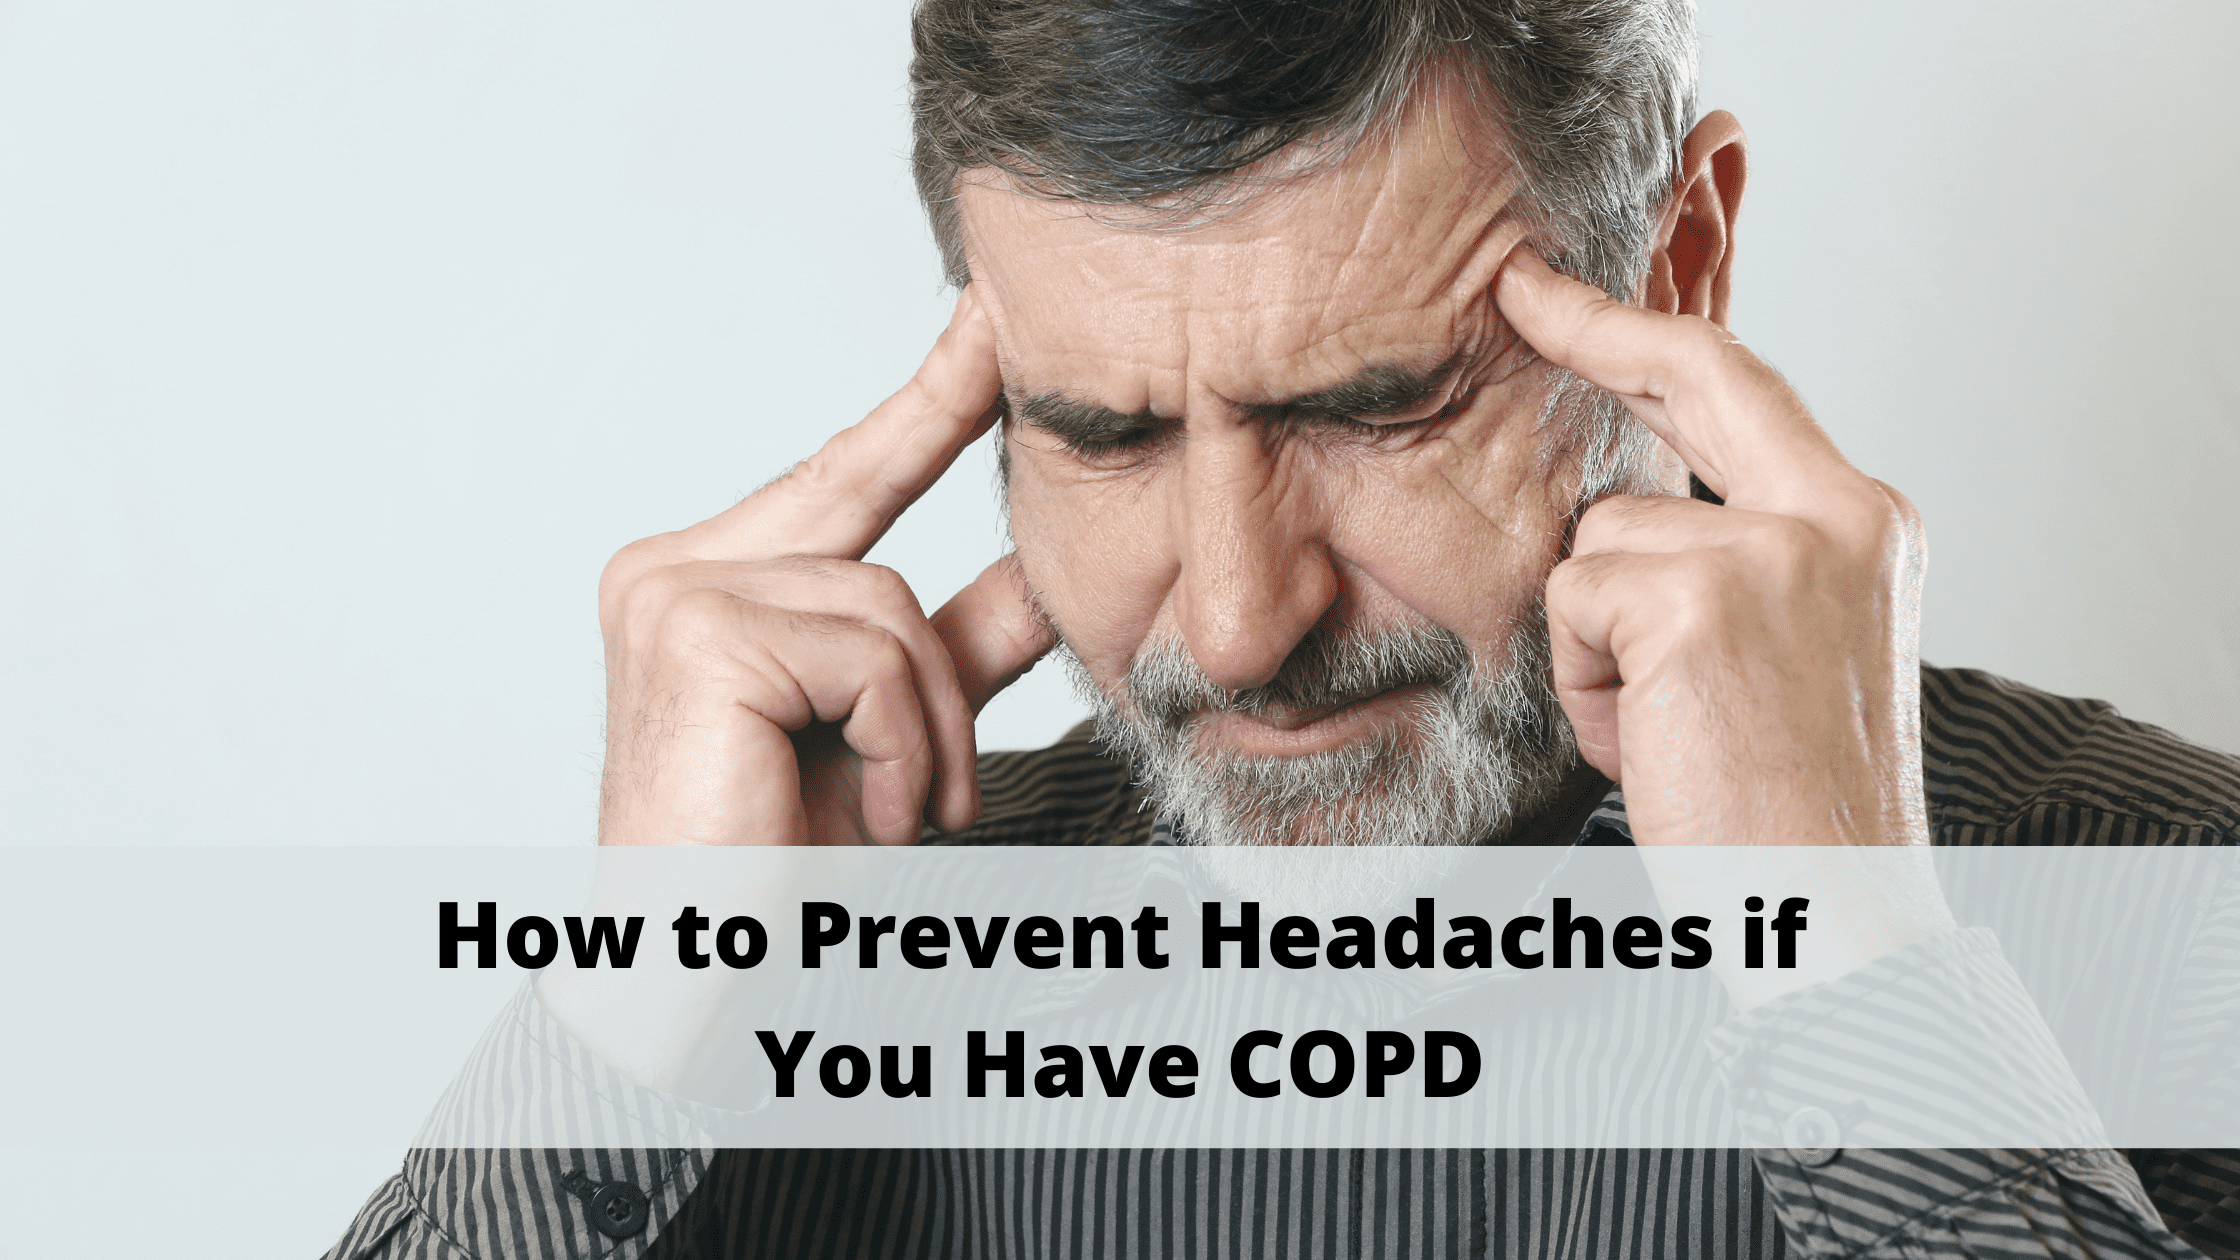 How to Prevent Headaches if You Have COPD